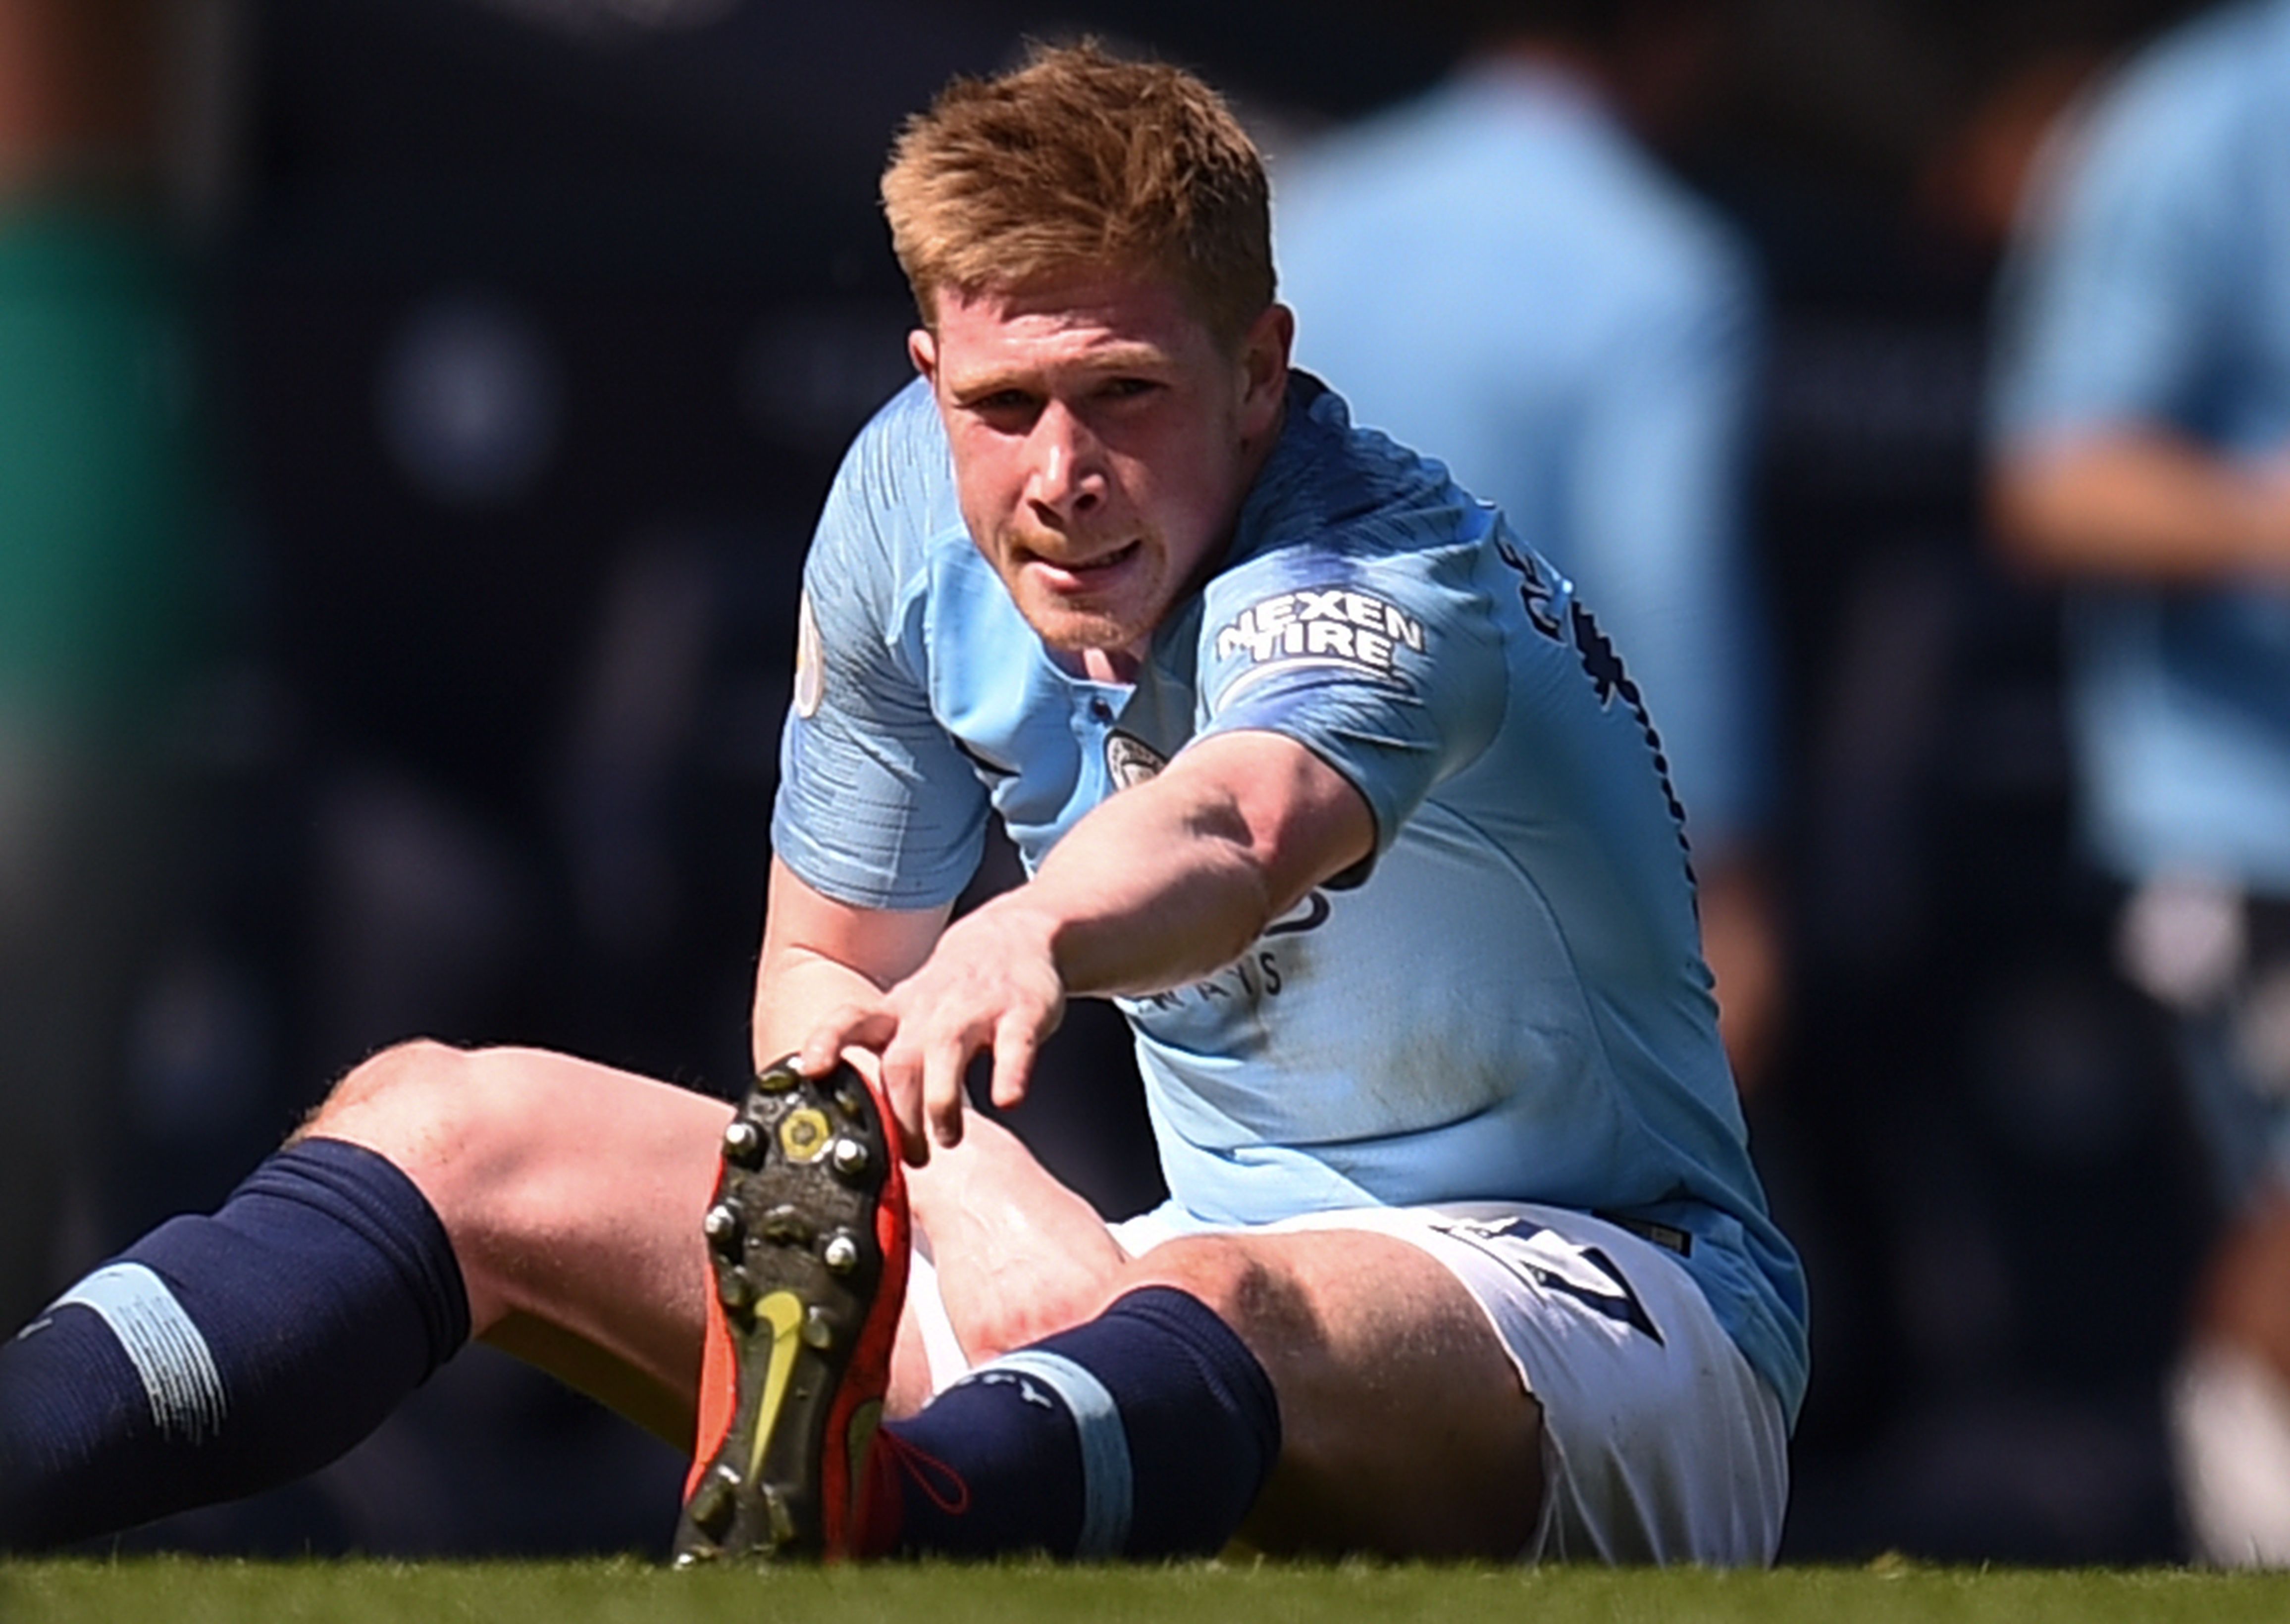 De Bruyne's injury a reason to worry for Manchester City (Photo by OLI SCARFF/AFP/Getty Images)